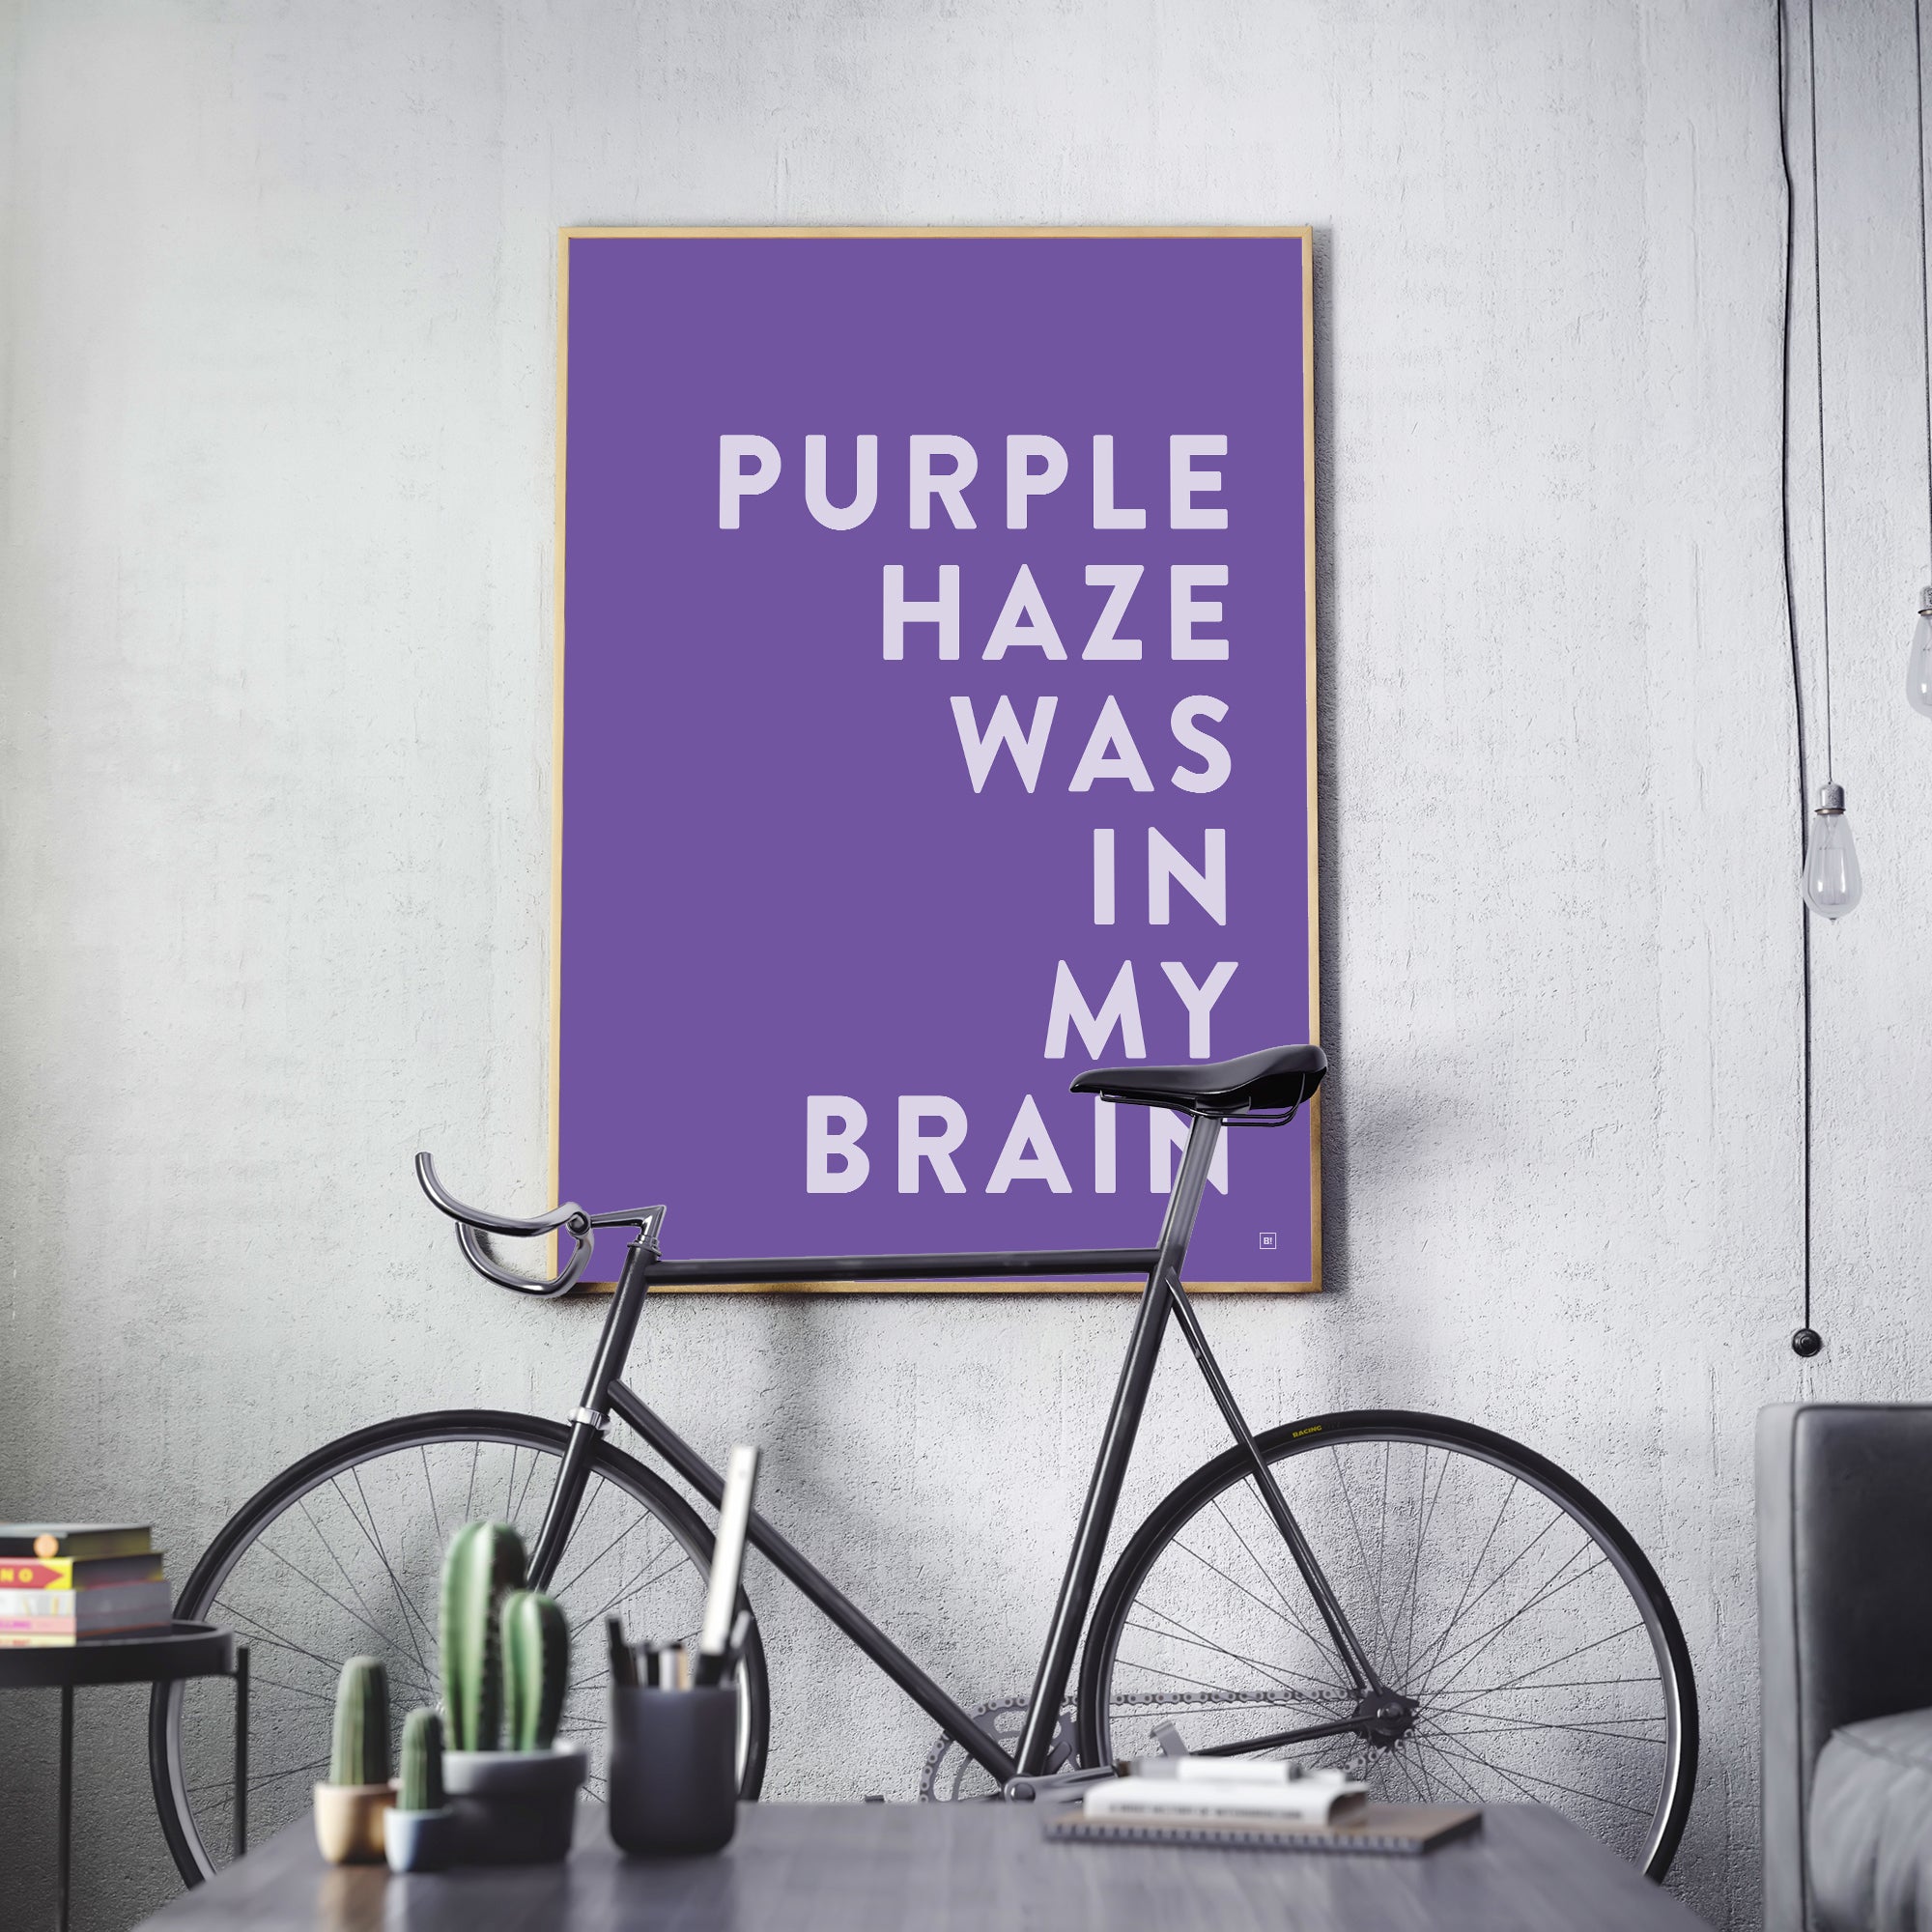 Be inspired by our Jimi Hendrix "Purple Haze Was In My Brain" lyric art print! This artwork has been printed using the giclée process on archival acid-free paper and is showcased in a modern living room, capturing its timeless beauty in every detail.